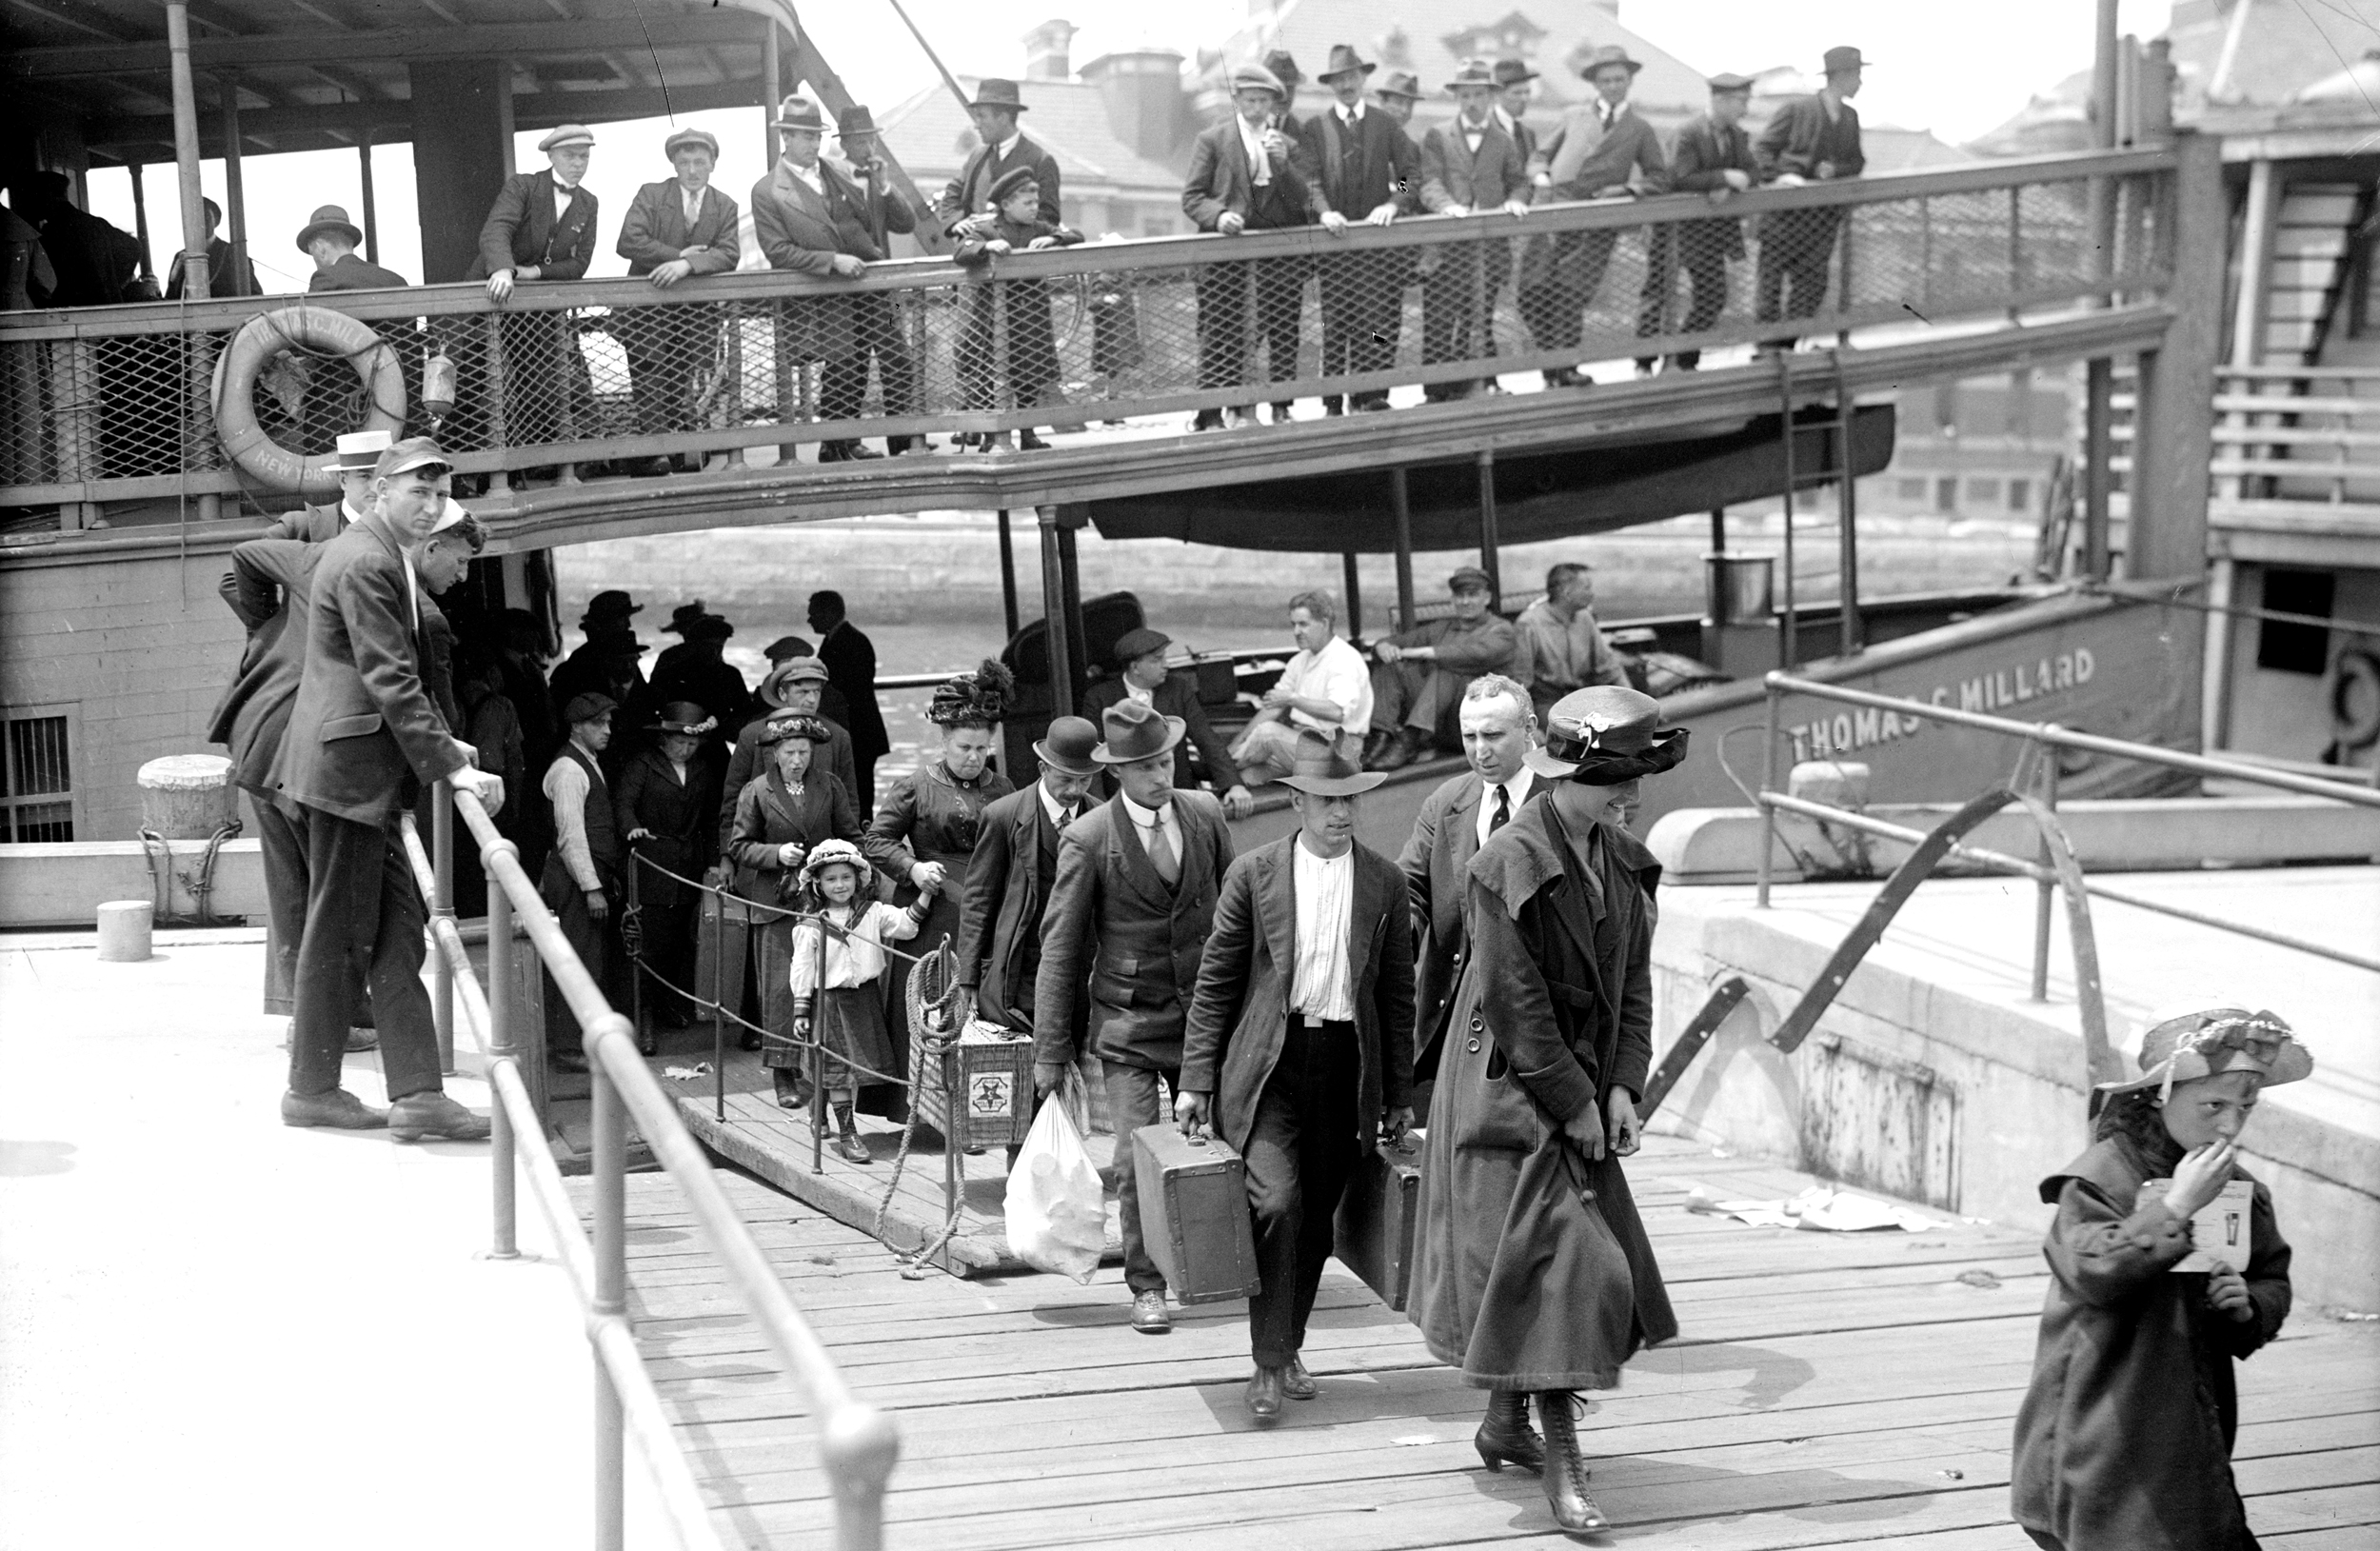 Newly arrived immigrants disembark from the passenger steamer Thomas C. Millard upon their arrival at Ellis Island, in New York, early twentieth century.